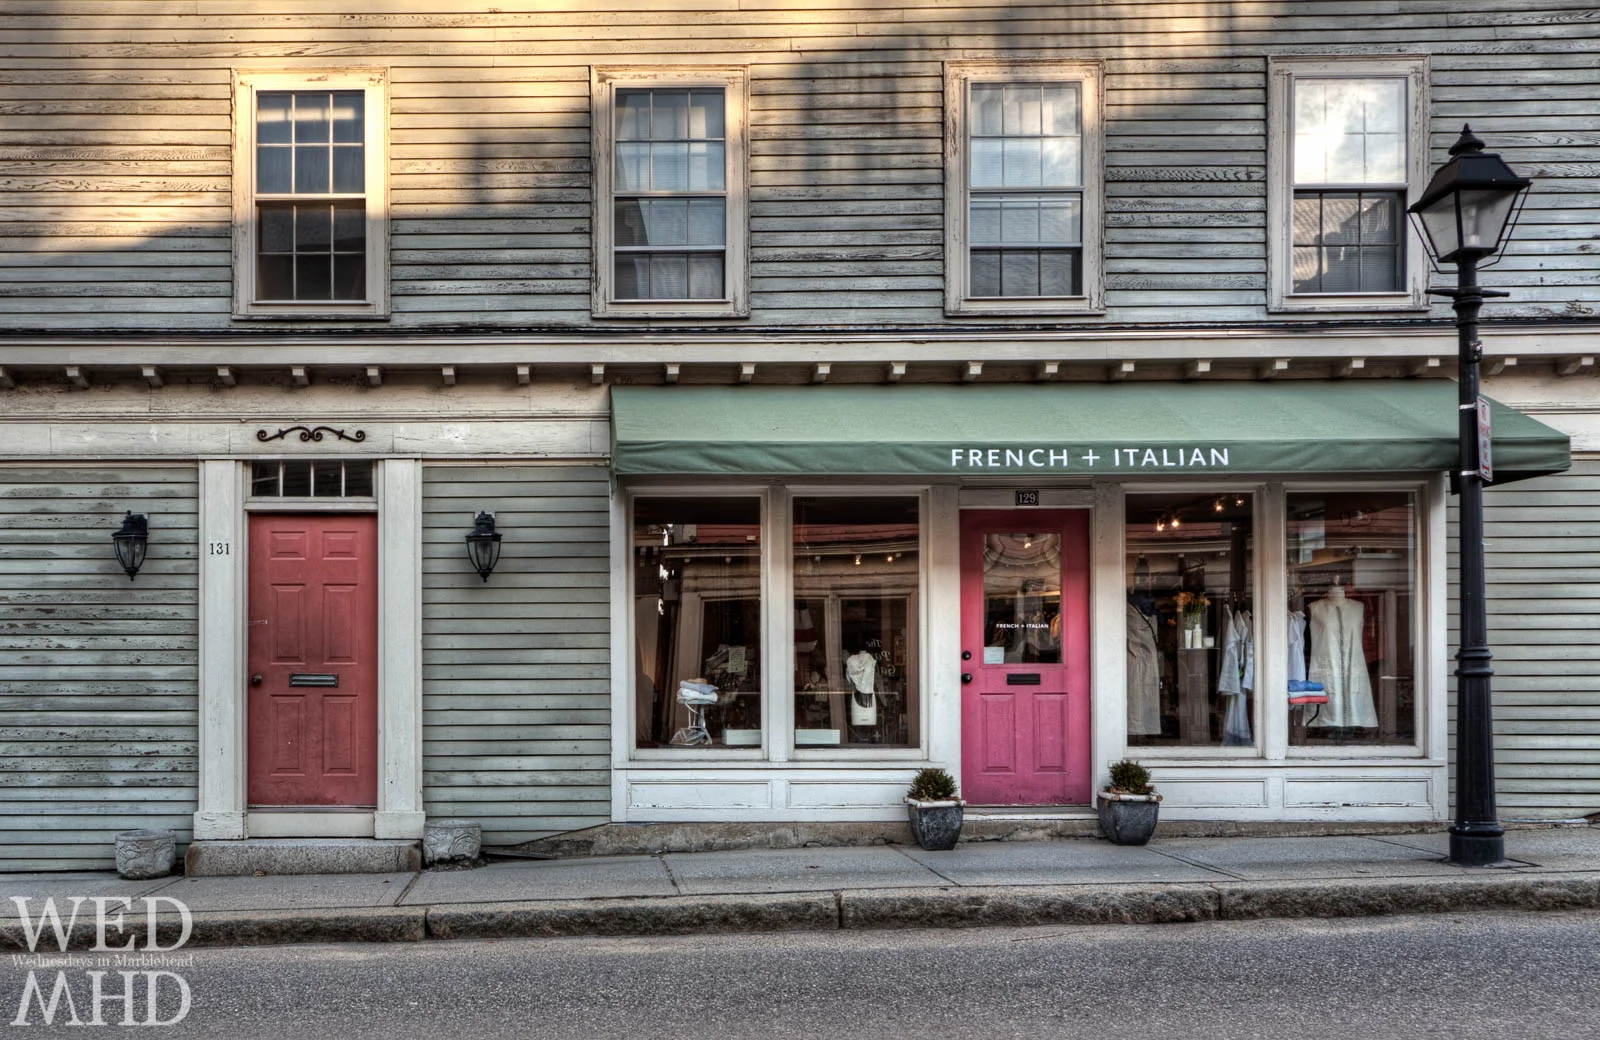 French + Italian: A 'piece of Europe' in Marblehead - Marblehead Weekly News